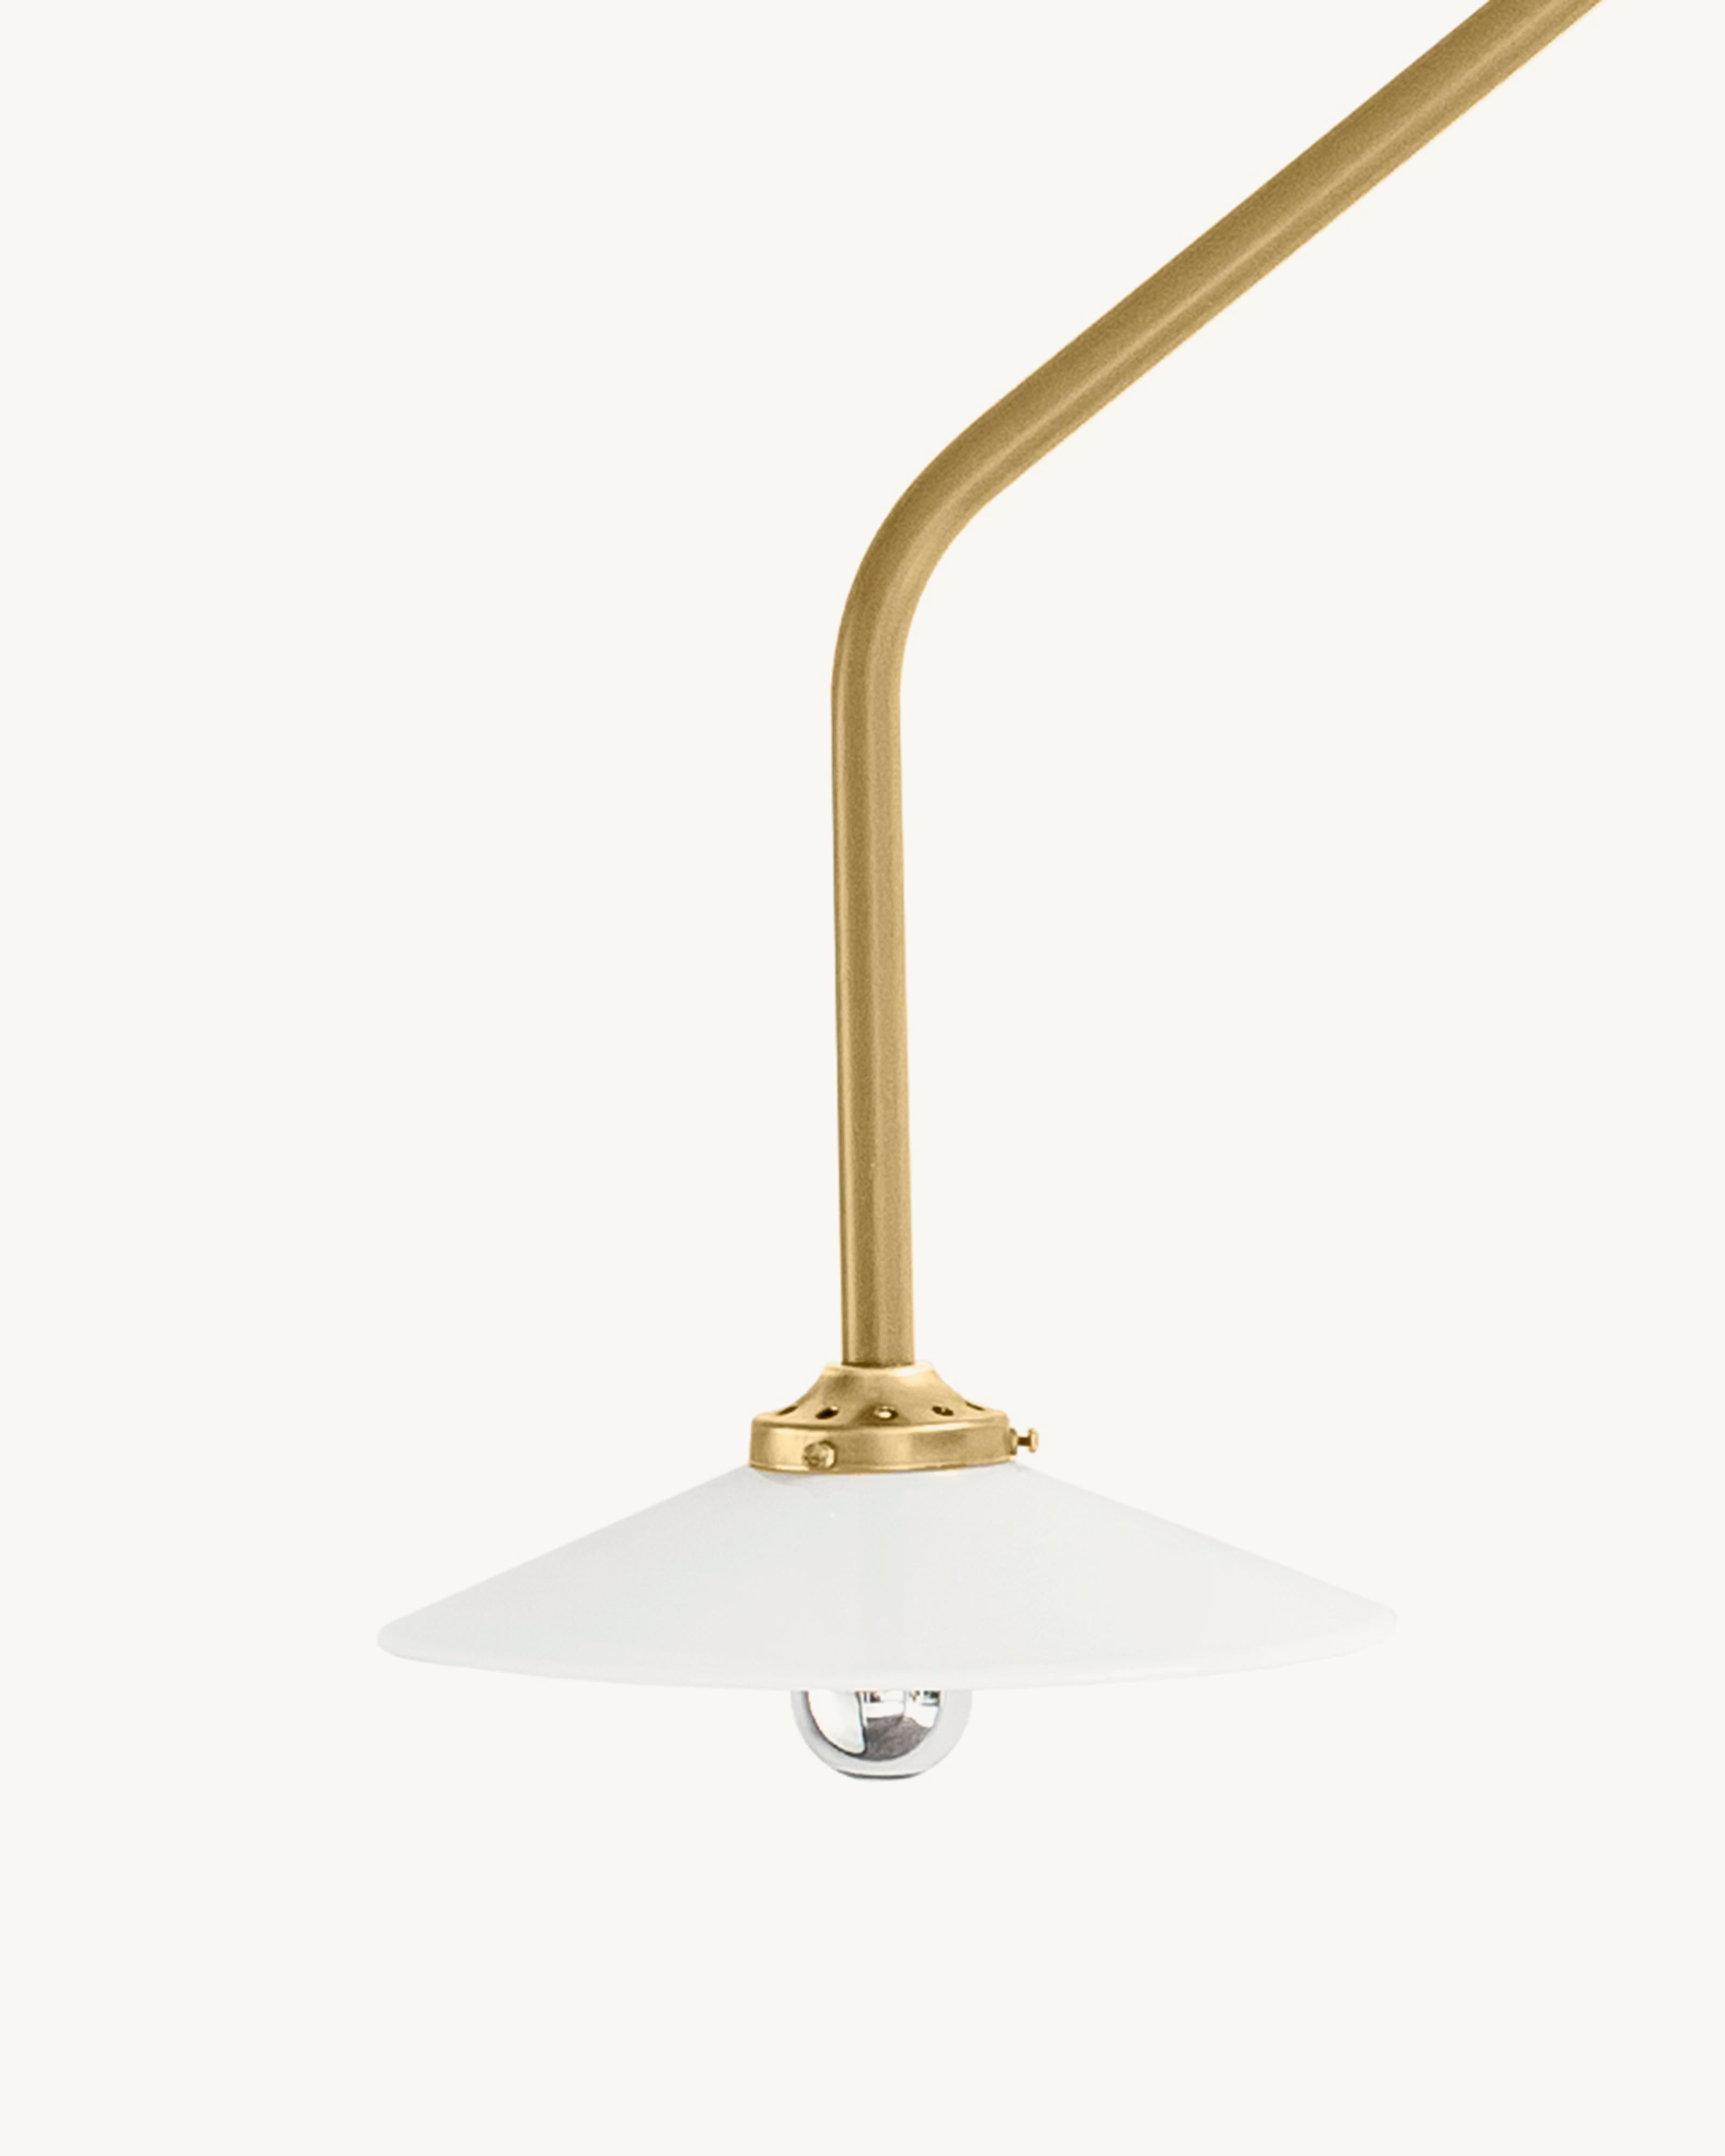 Hanging Lamp N°4 by Muller Van Severen x Valerie Objects

Dimensions: L. 90 W. 25 H. 180 CM
Finish: Brass (V9015031M)

Specifications:
— light source: 4W led
— colour tempertaure: K2700 
— lumen 350
— IP rating 20
— dimmable

Material: 
— lamp frame